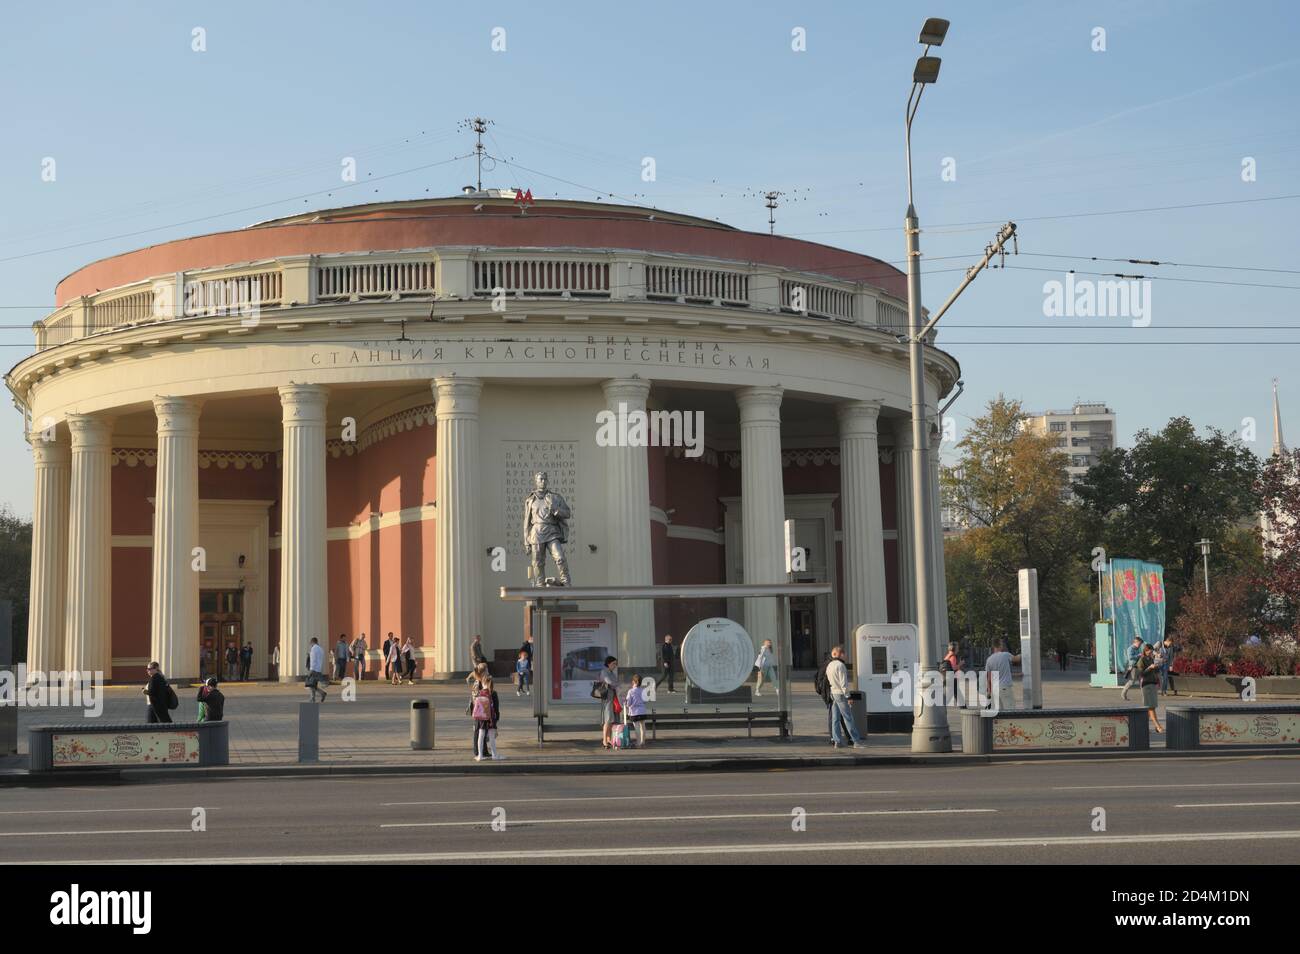 Entrance to Krasnopresnenskaya station of Moscow metro, Moscow, Russia. Opened in 1954, the entrance pavilion is a rotunda with Doric columns Stock Photo